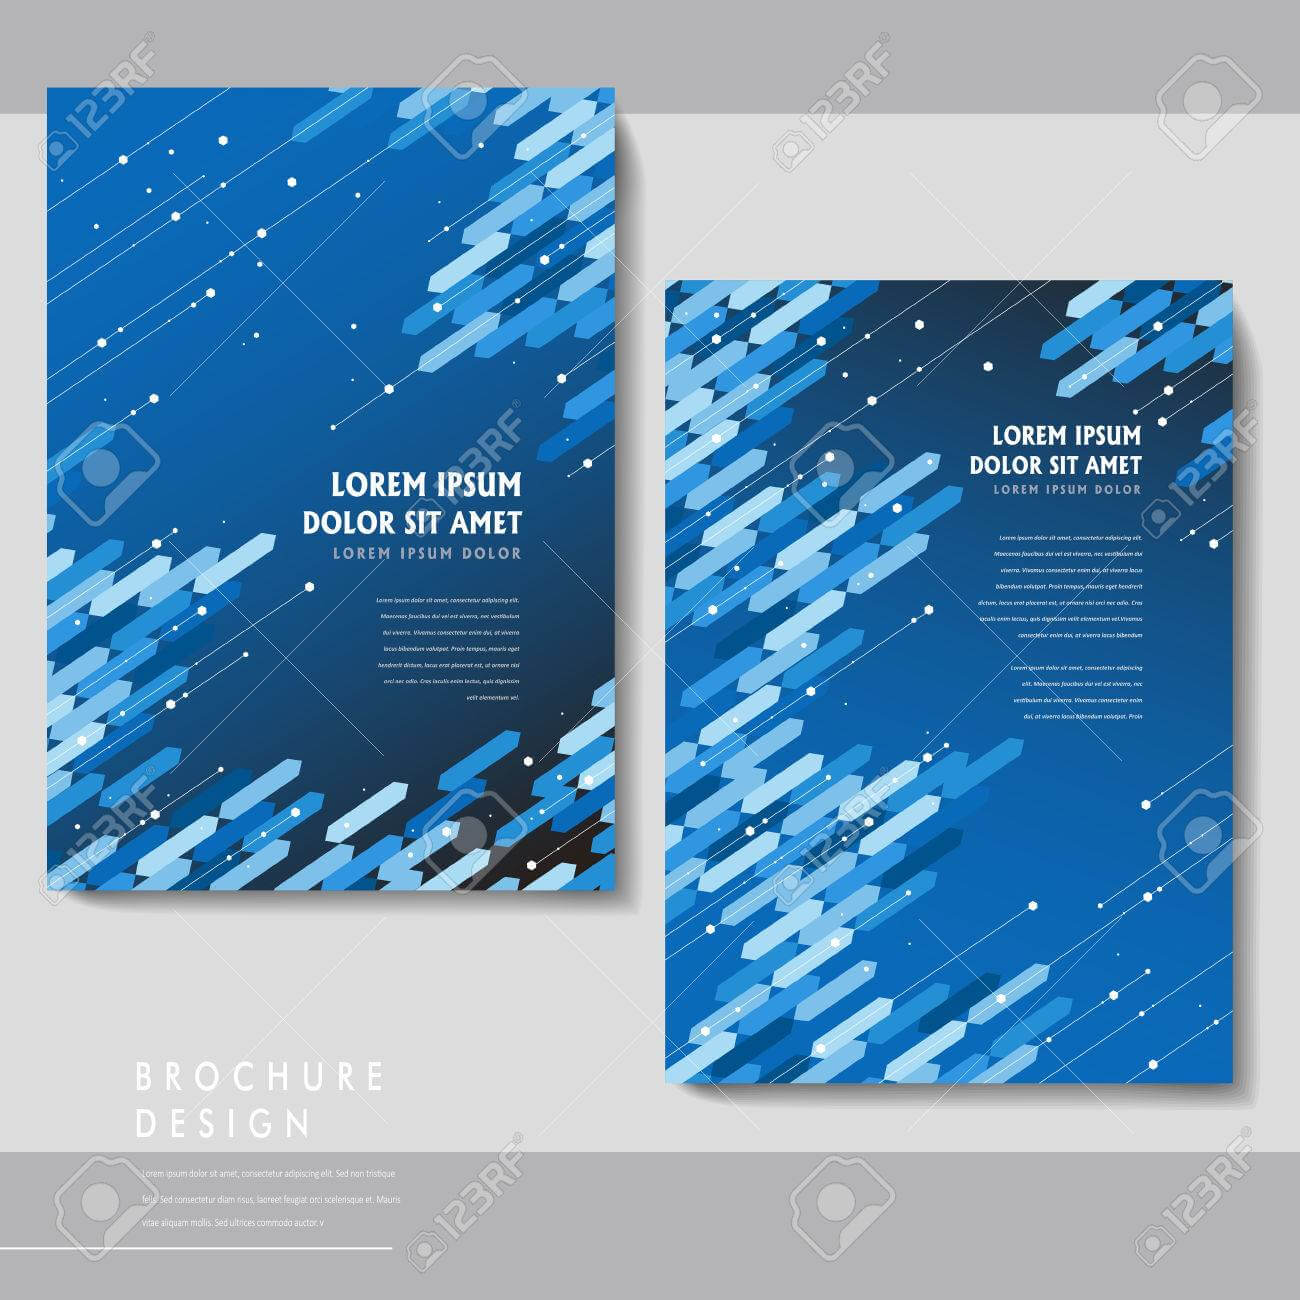 High Tech Brochure Template Design With Blue Geometric Elements In Technical Brochure Template